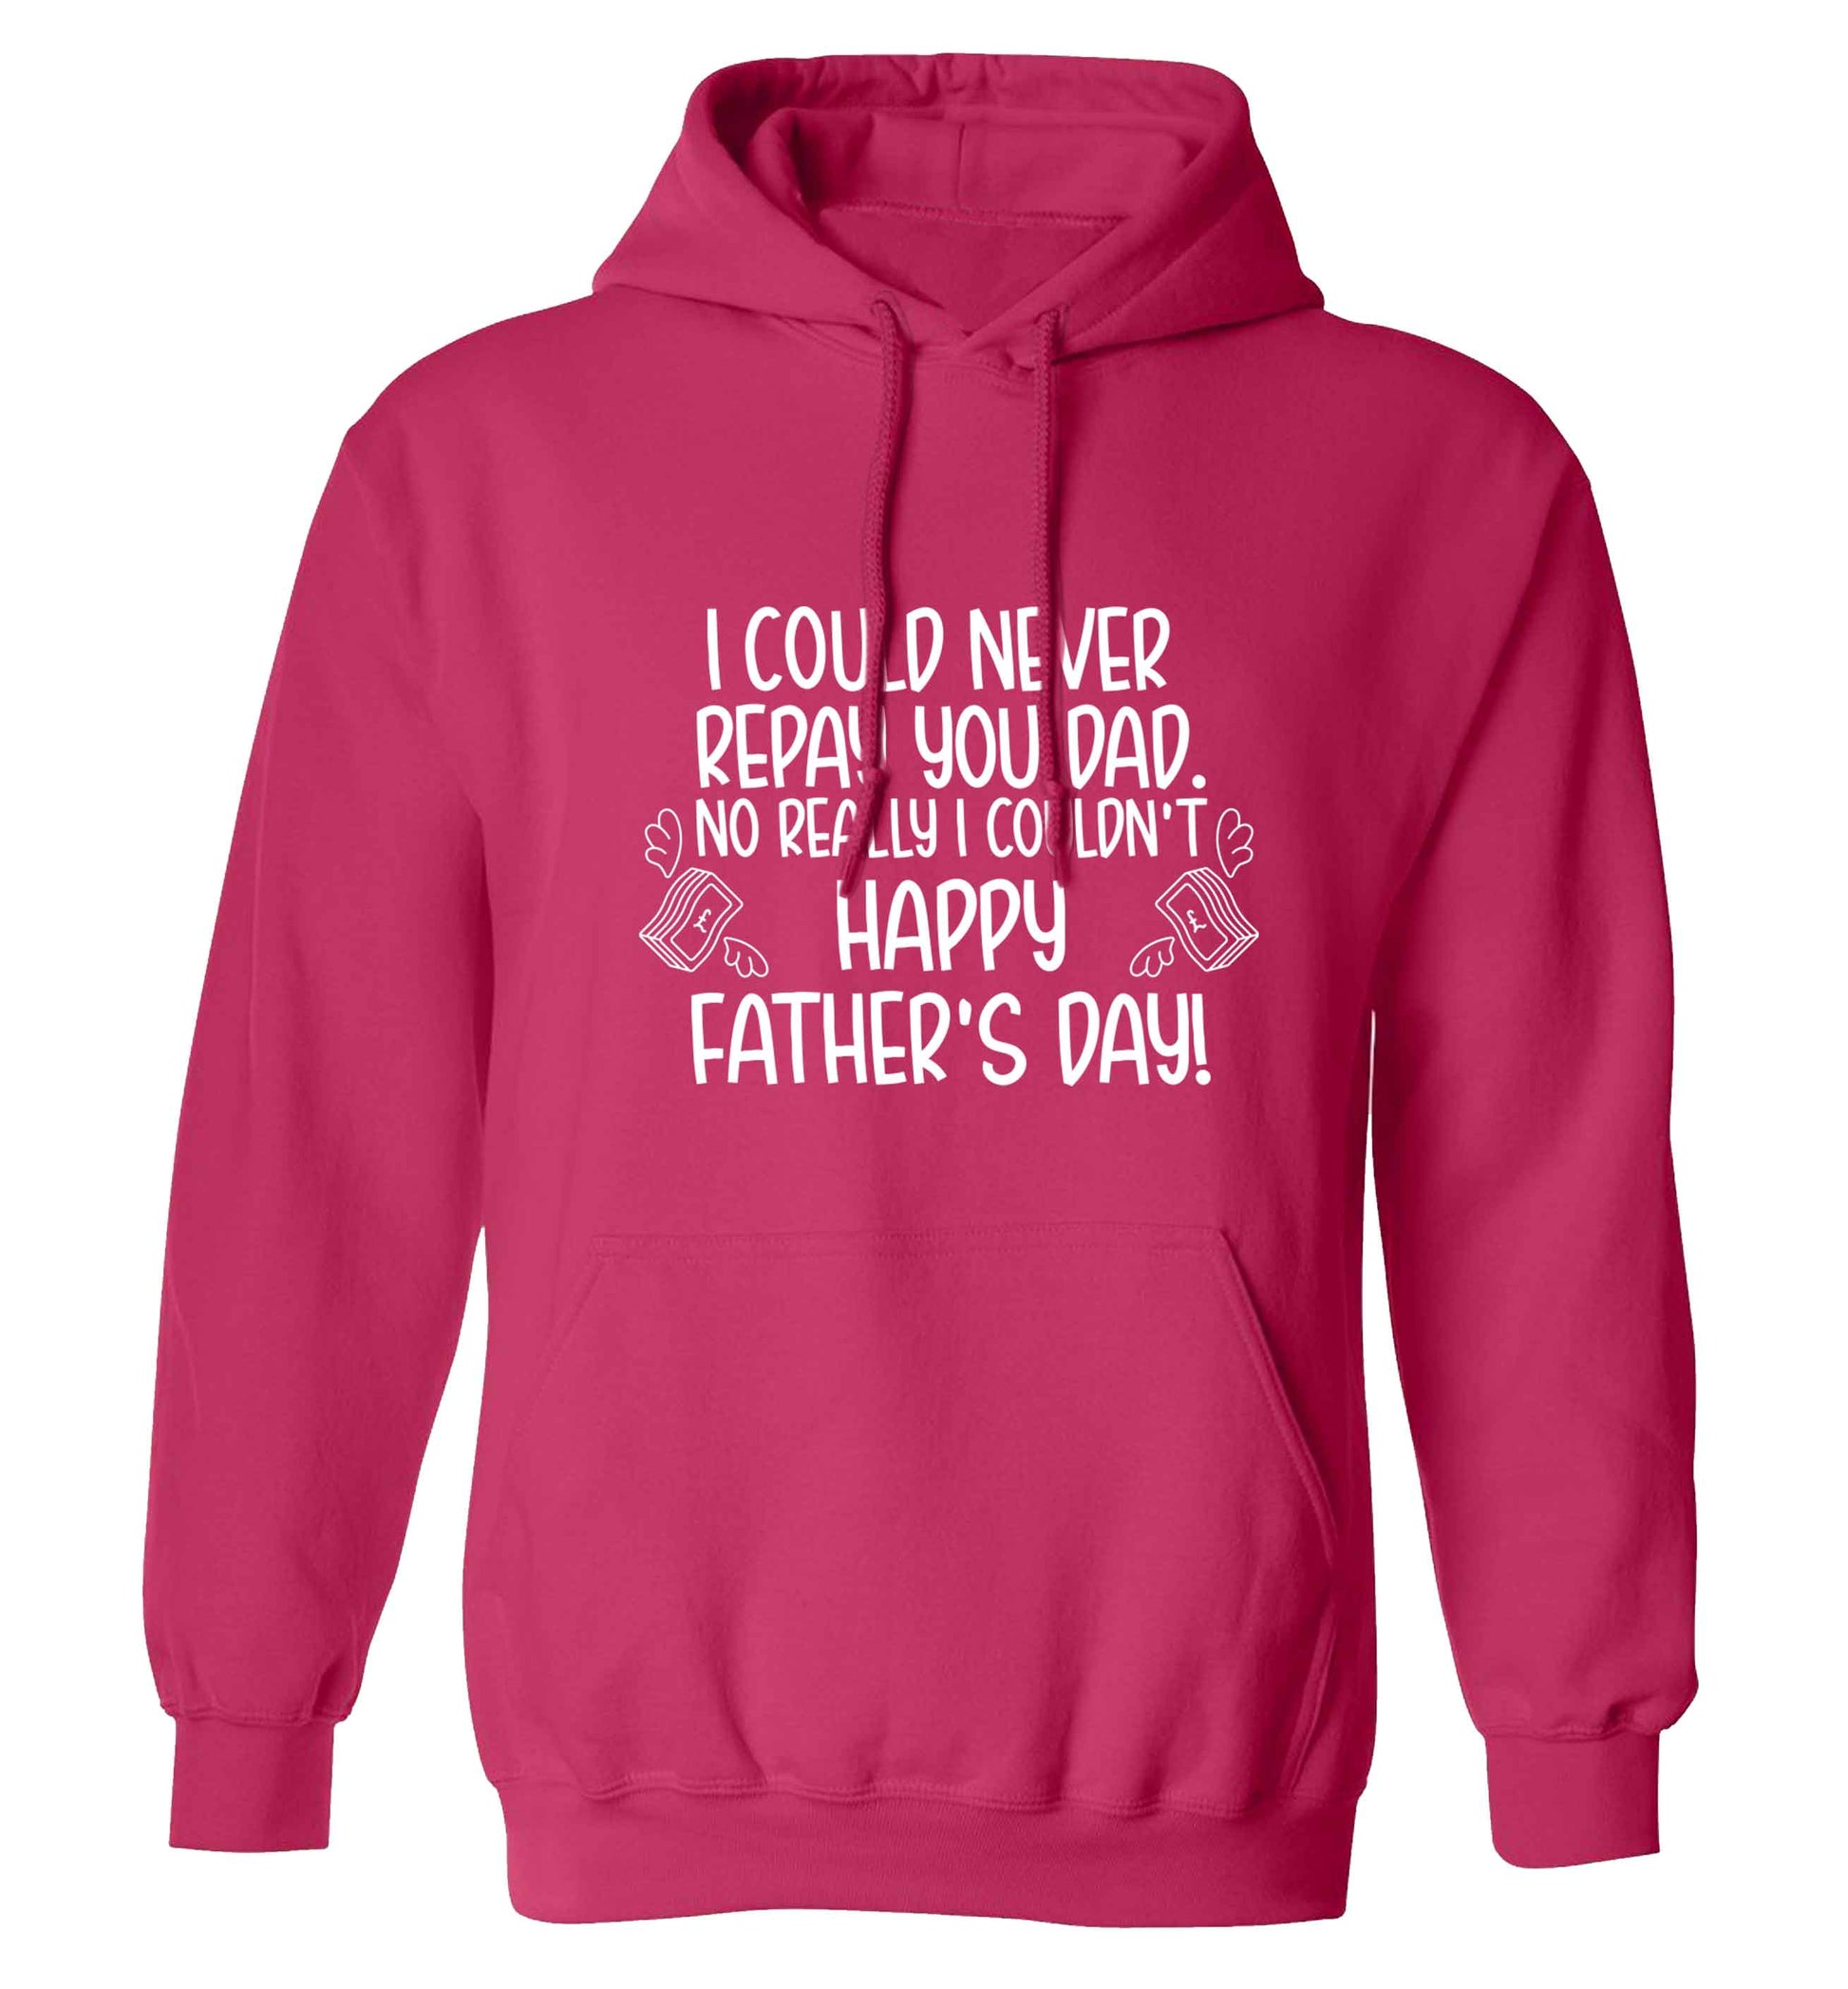 I could never repay you dad. No I really couldn't happy Father's day! adults unisex pink hoodie 2XL